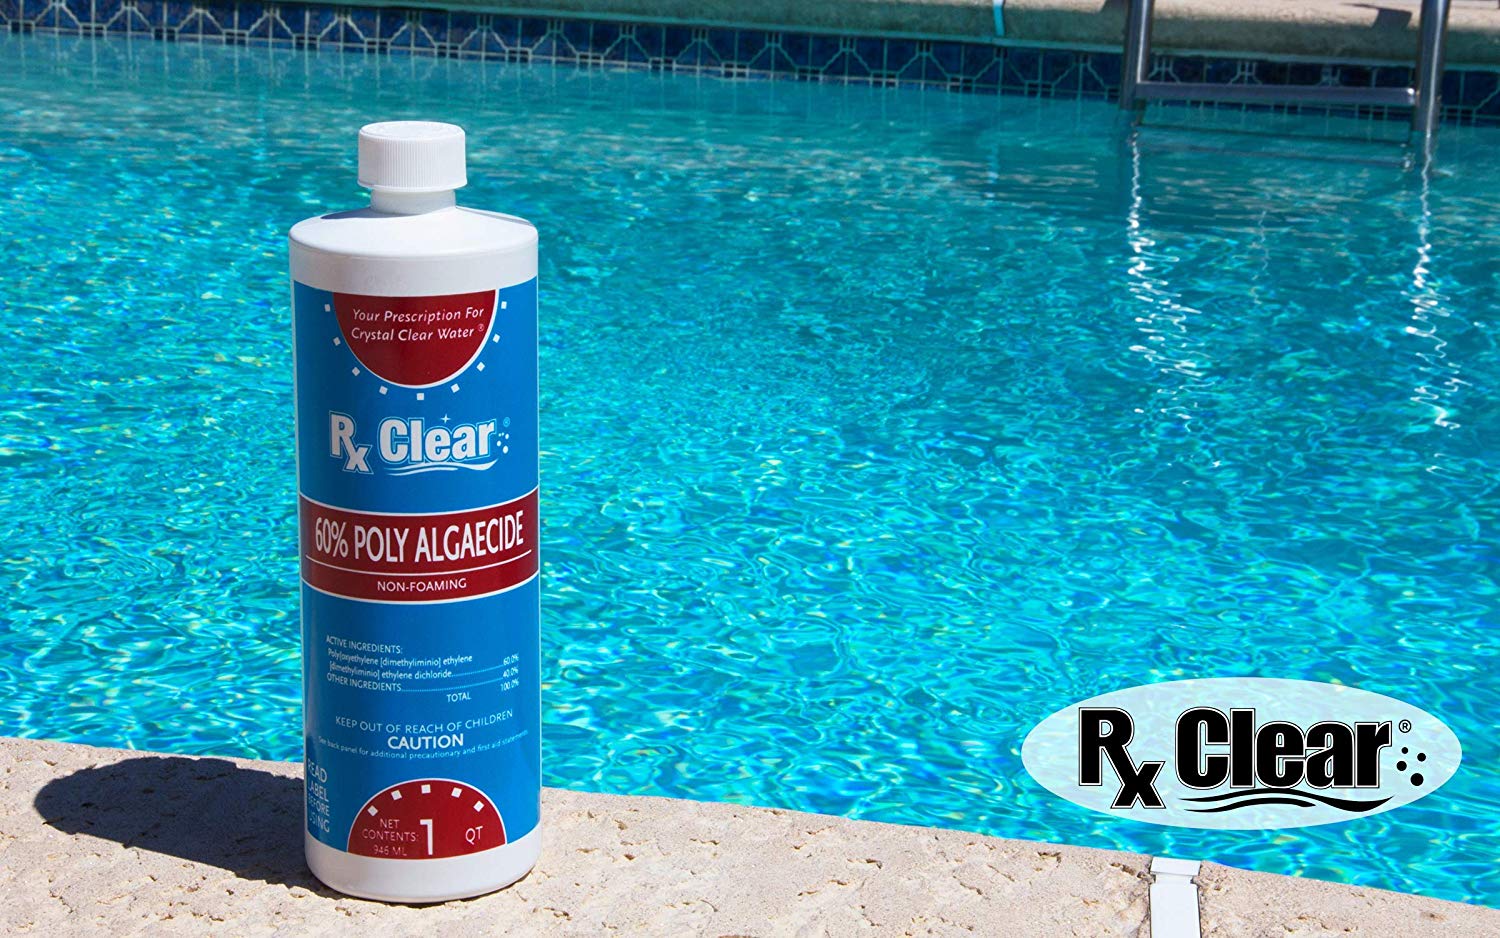 Rx Clear Algaecide 60 Plus Liquid for Swimming Pools, 6 Pack - image 3 of 7